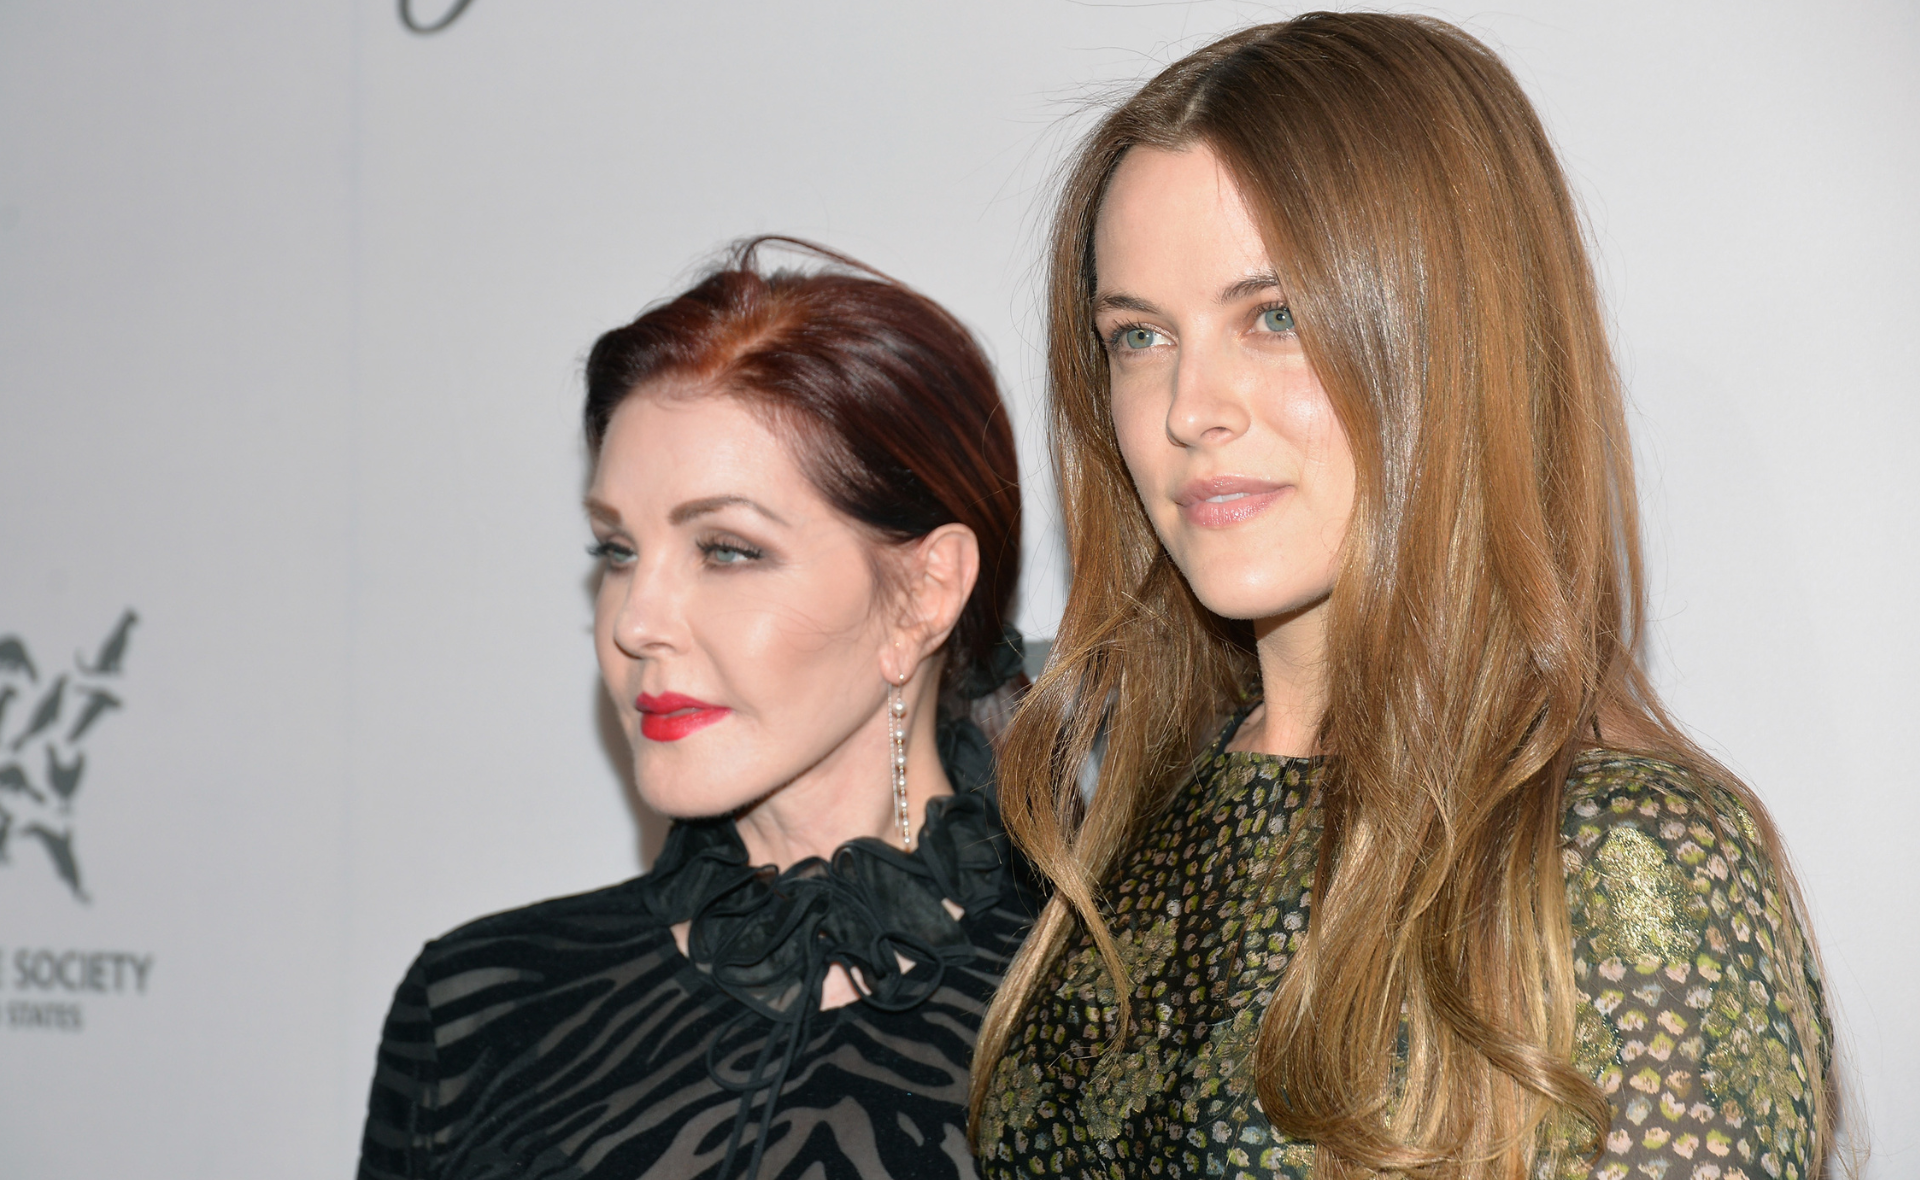 Riley Keough and Priscilla Presley settle legal dispute over the late Lisa Marie’s will